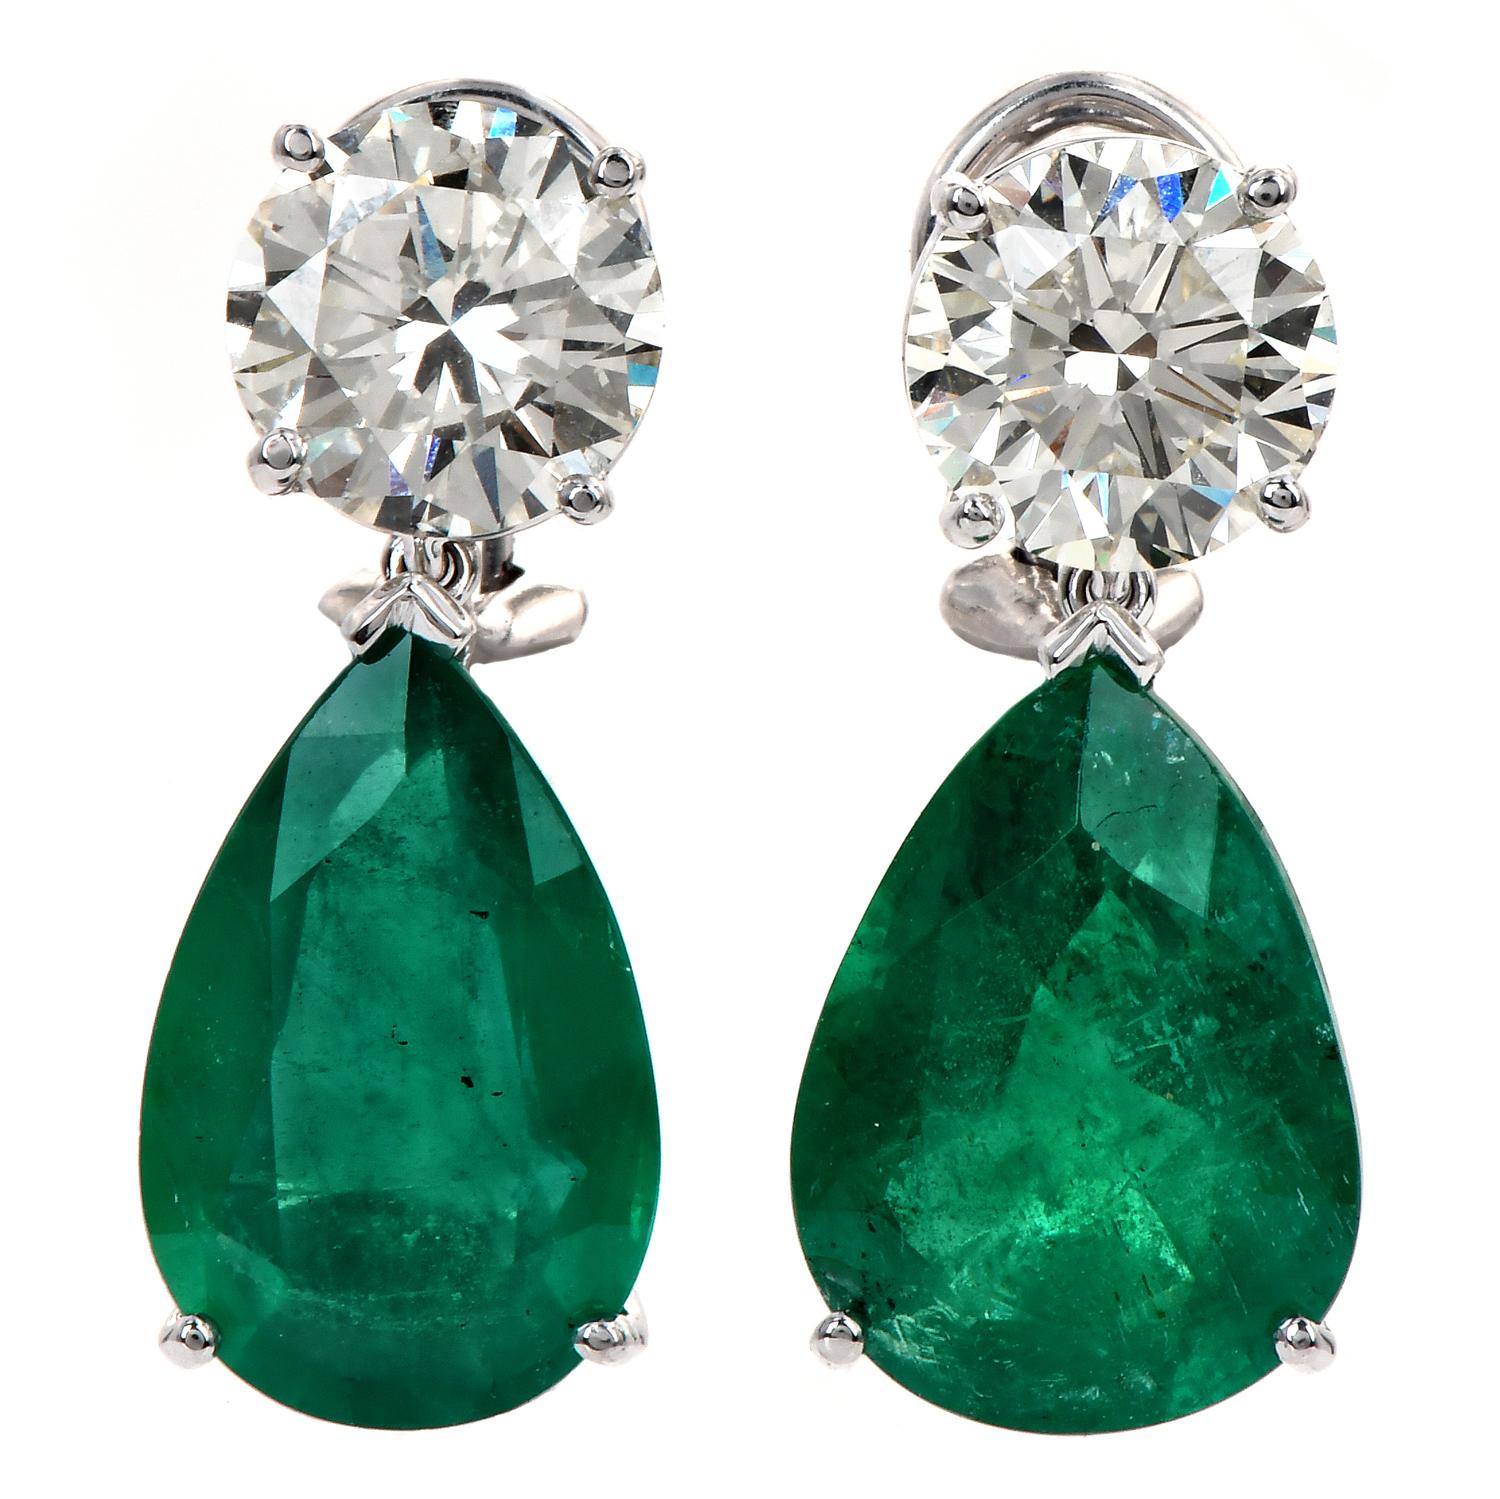 These exquisite earrings are truly a sight to behold.

Crafted in solid 18K White Gold.

They feature a clip-on closure with posts in a dangle drop style, allowing the radiating Genuine Emeralds to gracefully sway with every movement, catching the